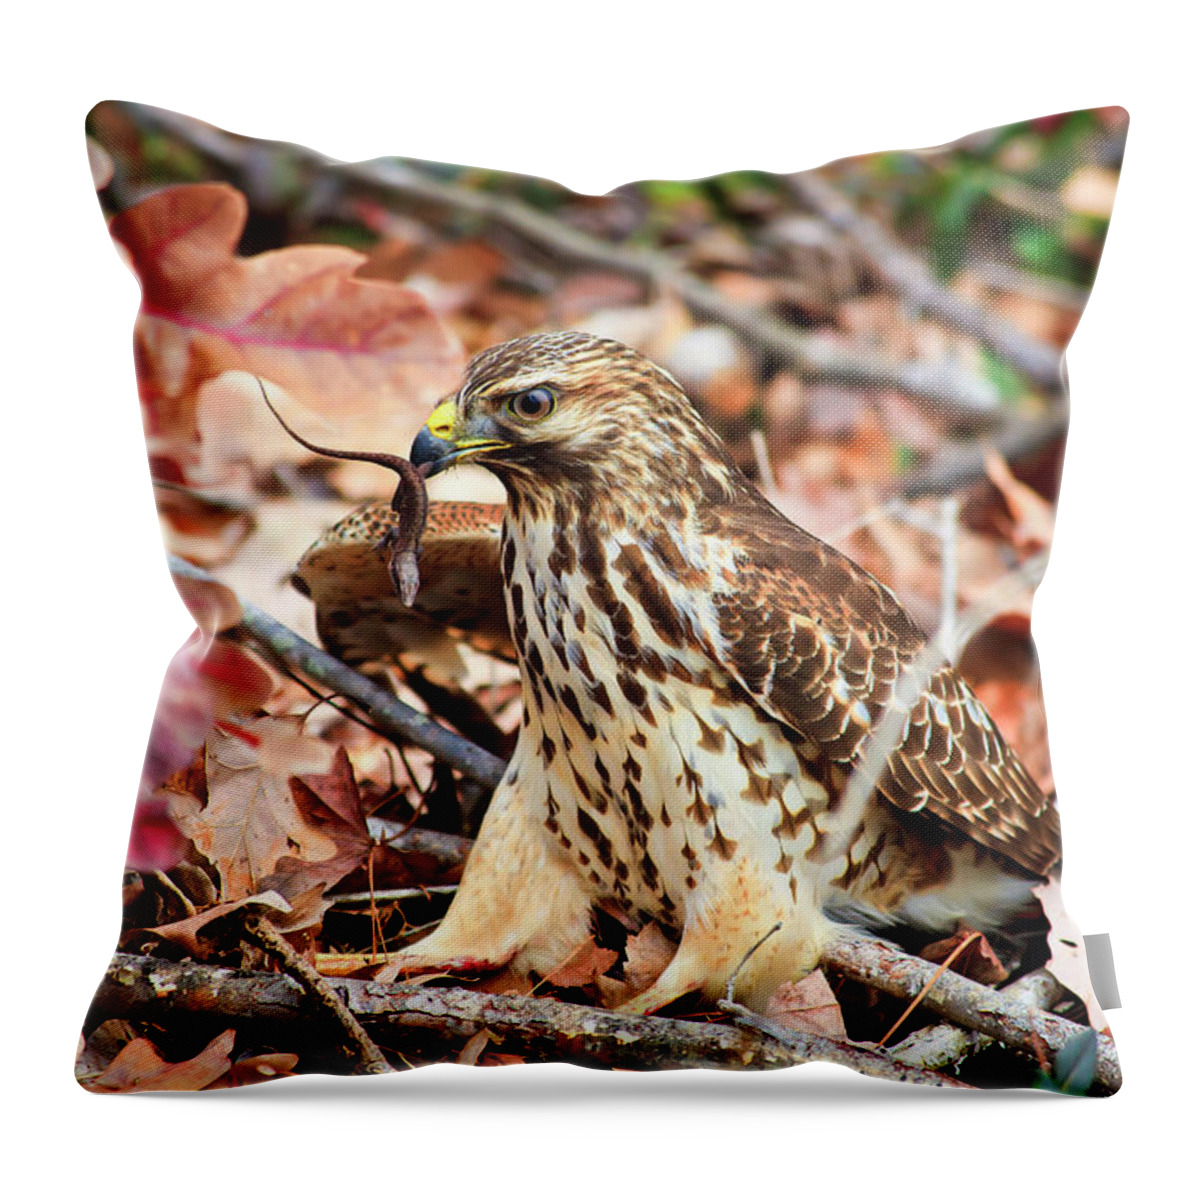 Red Throw Pillow featuring the photograph Hawk Catches Prey by Jill Lang